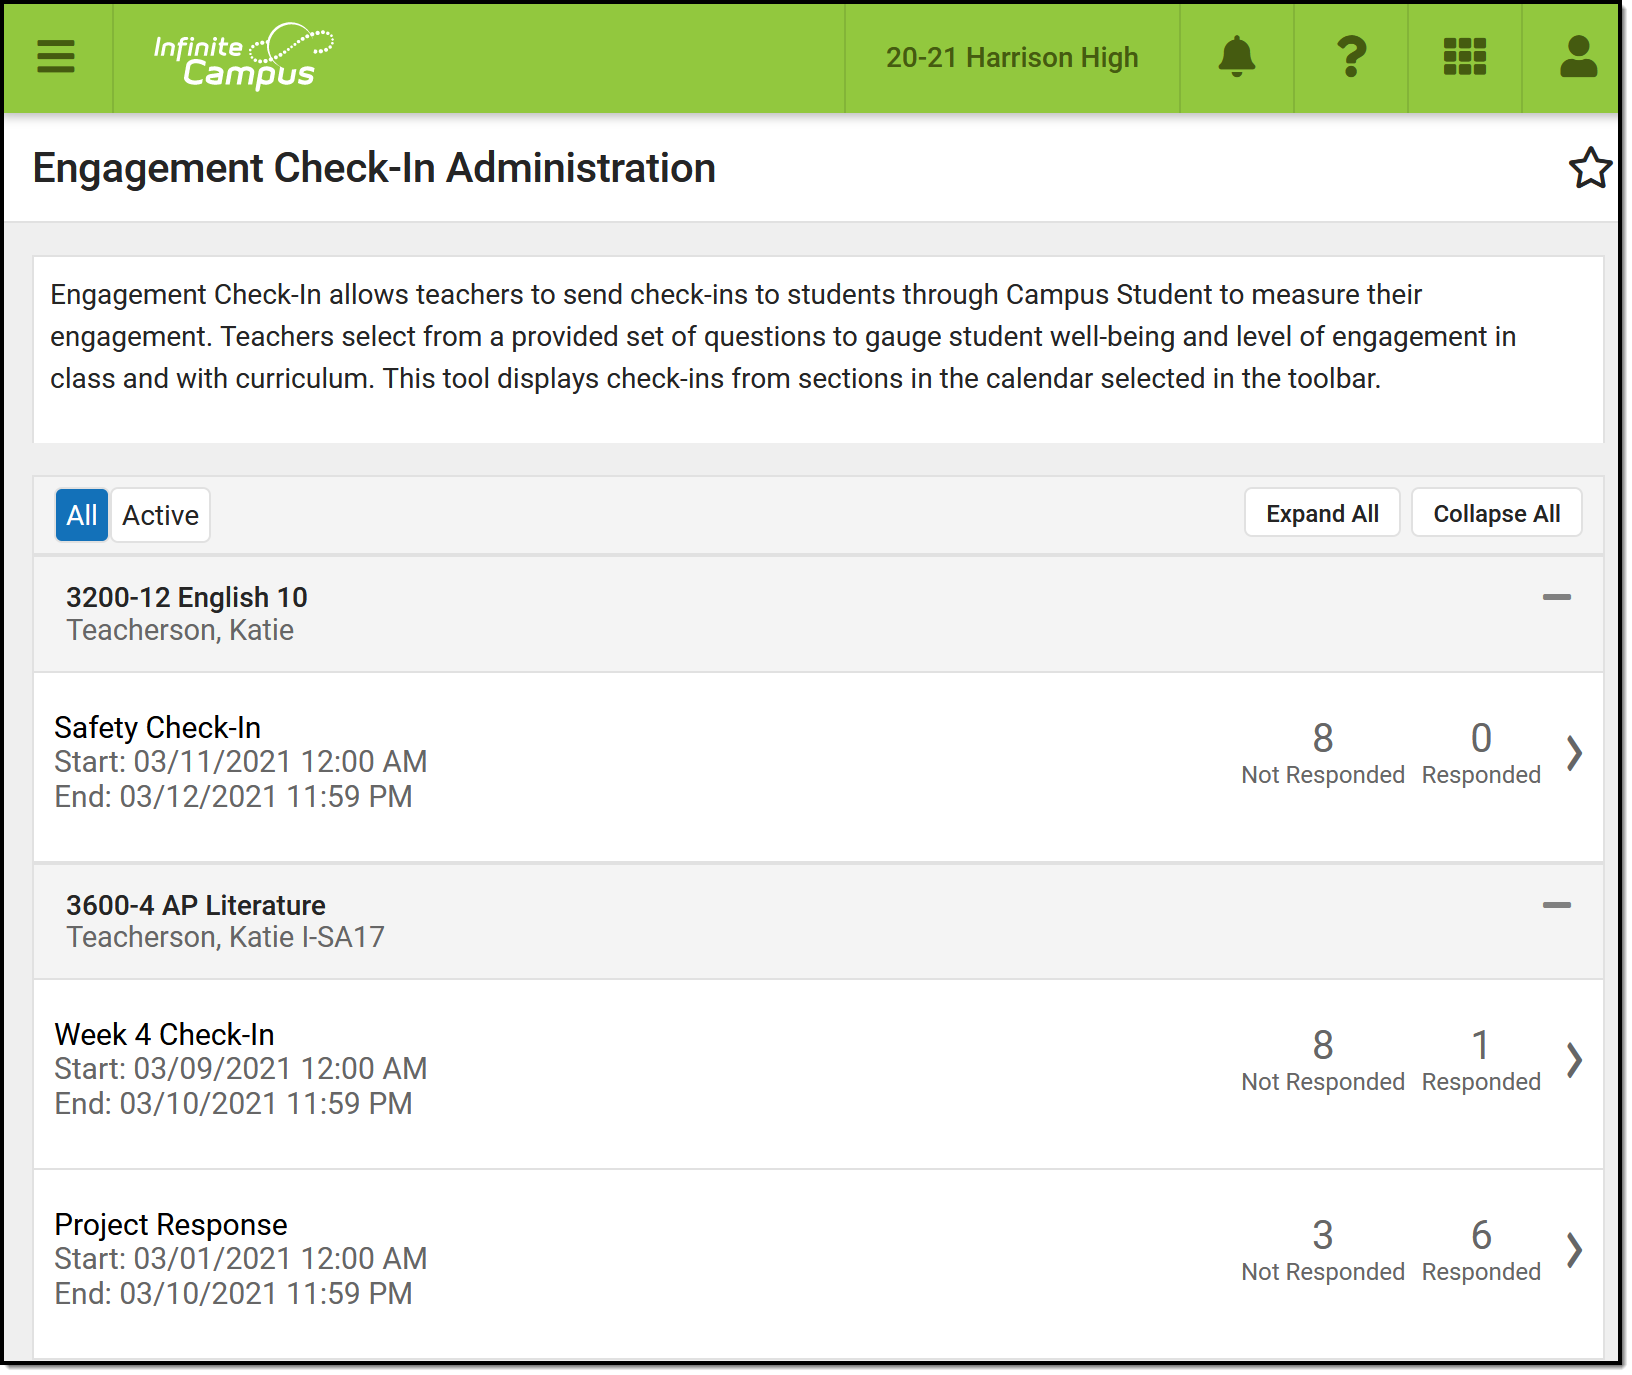 Screenshot of the engagement check-in administration tool with check-in's listed by section with the number of students who have and haven't responded.